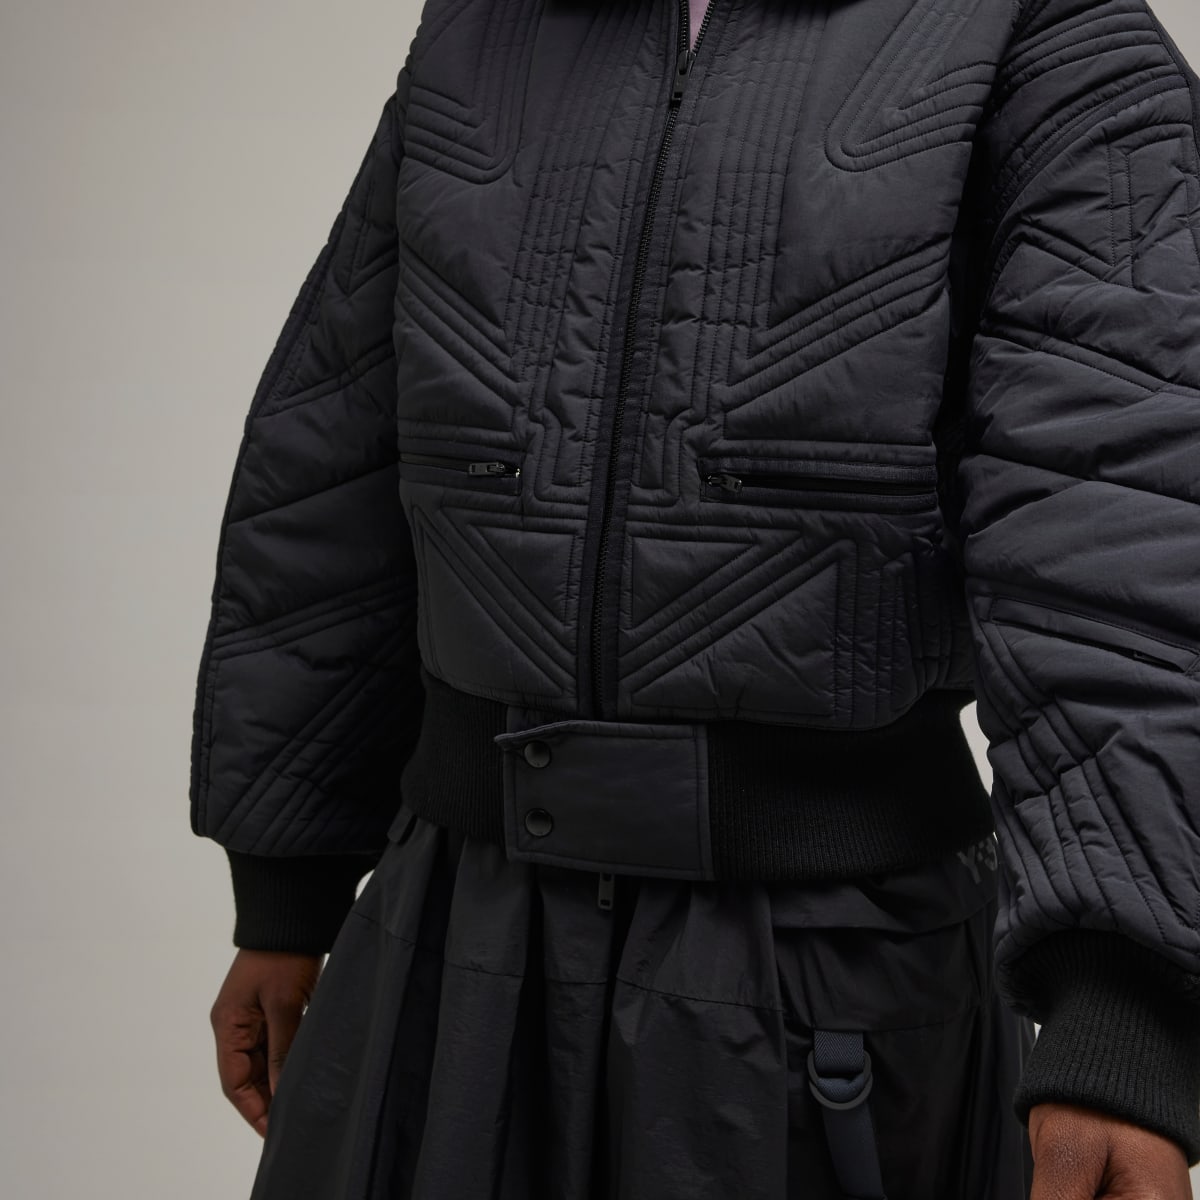 Adidas Y-3 Quilted Jacket. 6